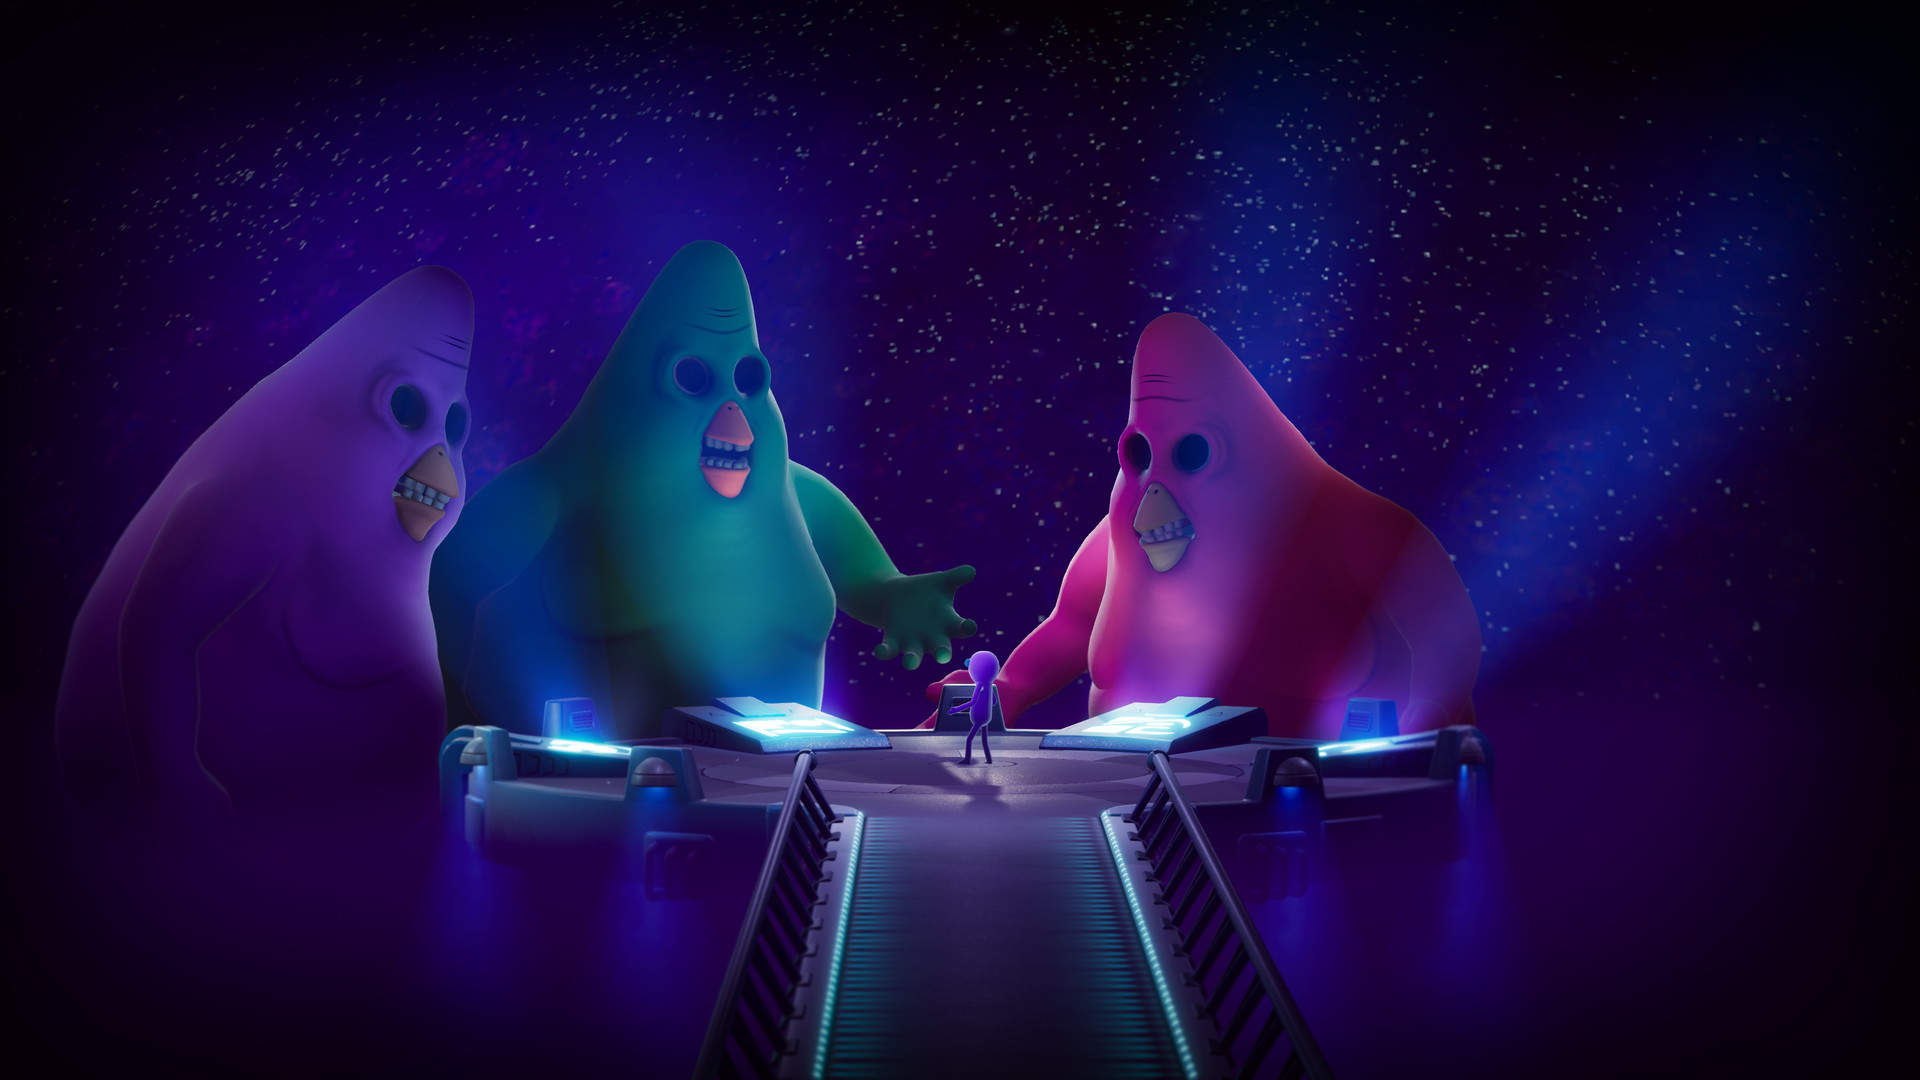 Trover Saves the Universe - screenshot 7